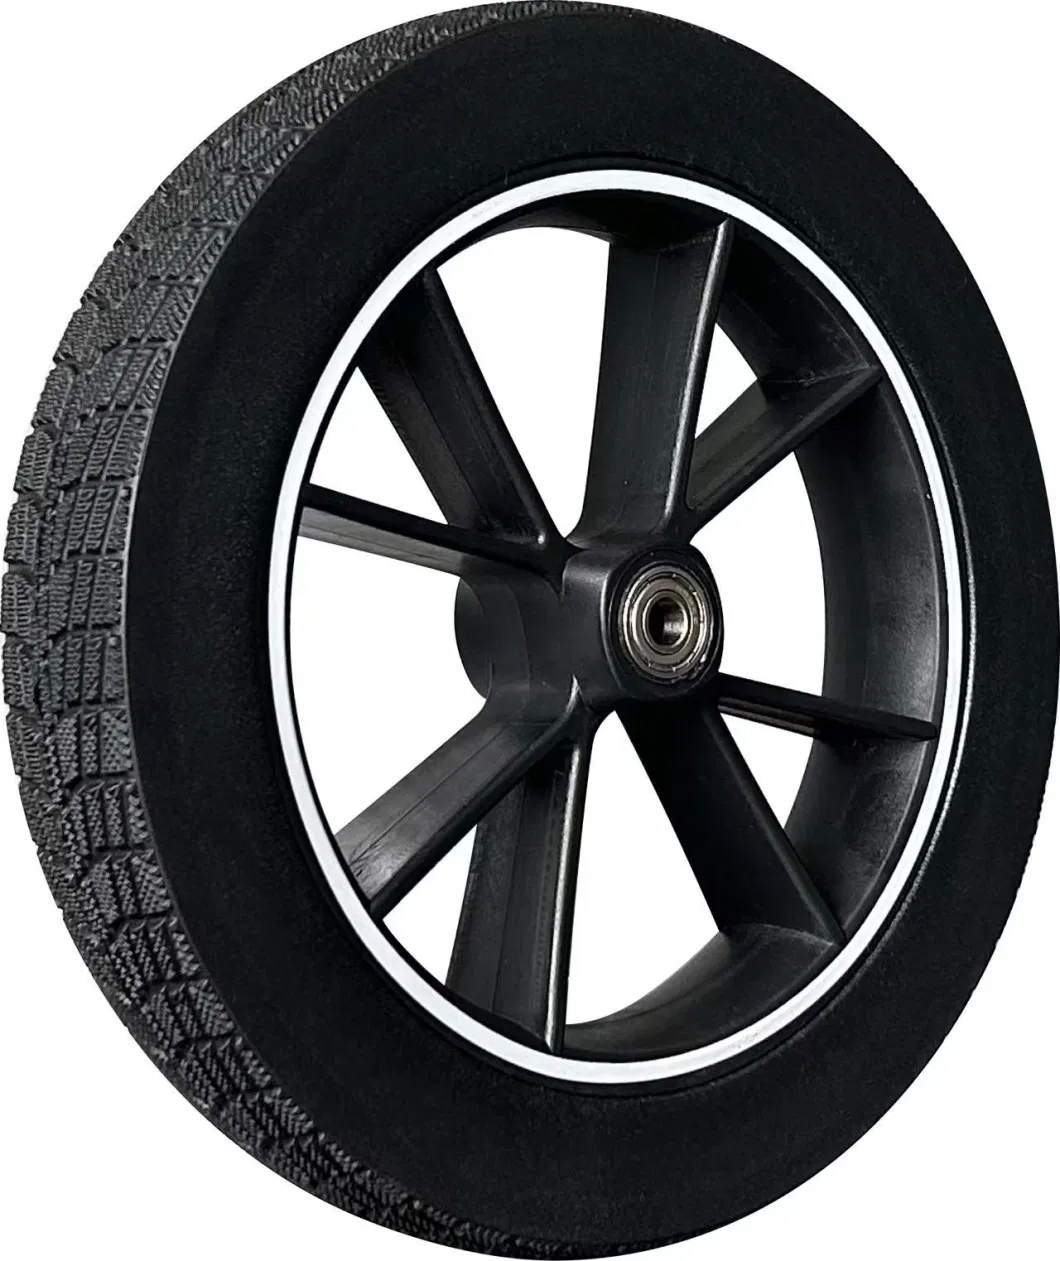 Noiseless PU Tire for Universal Camp Wheel